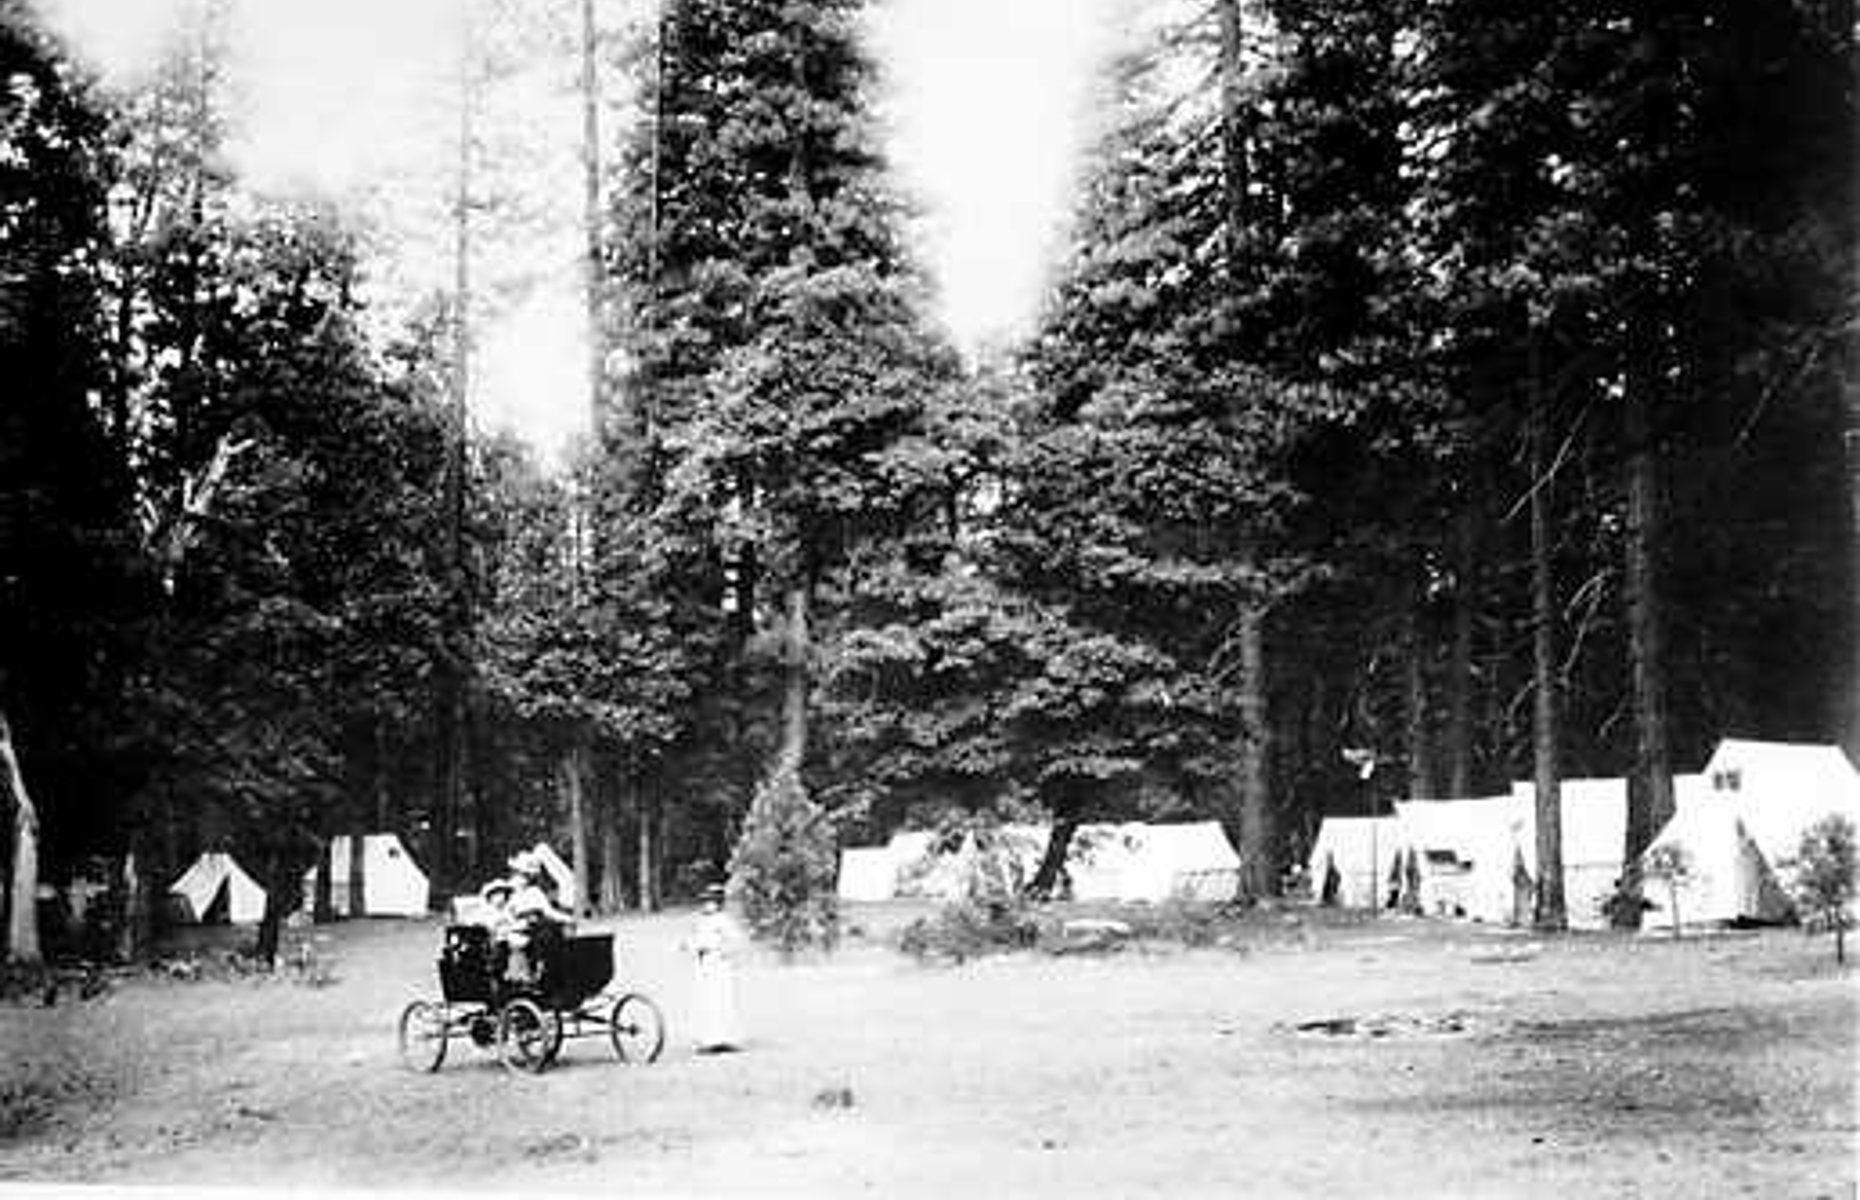 <p>The advent of roads in Yosemite began with wagon routes completed in the mid-1870s, with stagecoaches full of tourists filing into the park via three new toll roads. But in 1900, an automobile (the steam-powered 'locomobile' pictured) chugged into the national park for the first time. Annual visitors rose from around 3,000 in 1885 to over 30,000 by 1915, owing to the introduction of car access, more sophisticated highways and the (since discontinued) railroad. The number of yearly tourists surpassed half a million in 1940 and first breached the one-million threshold in 1954.</p>